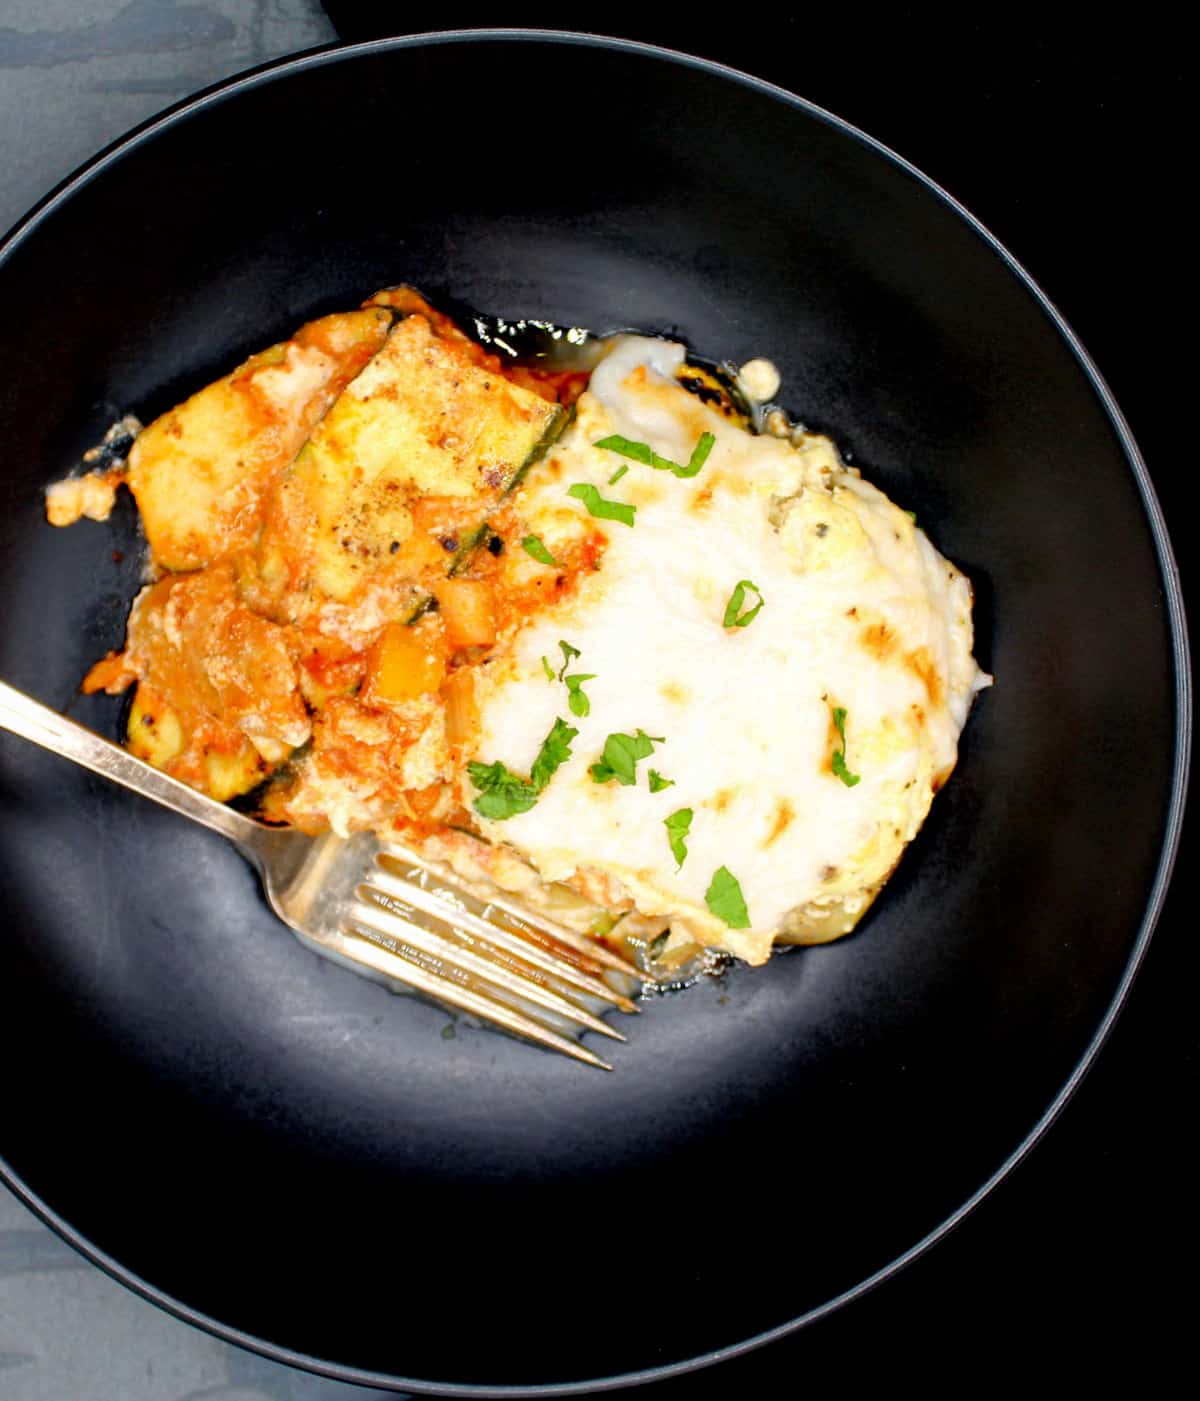 A serving of vegan zucchini lasagna in a black bowl with fork.